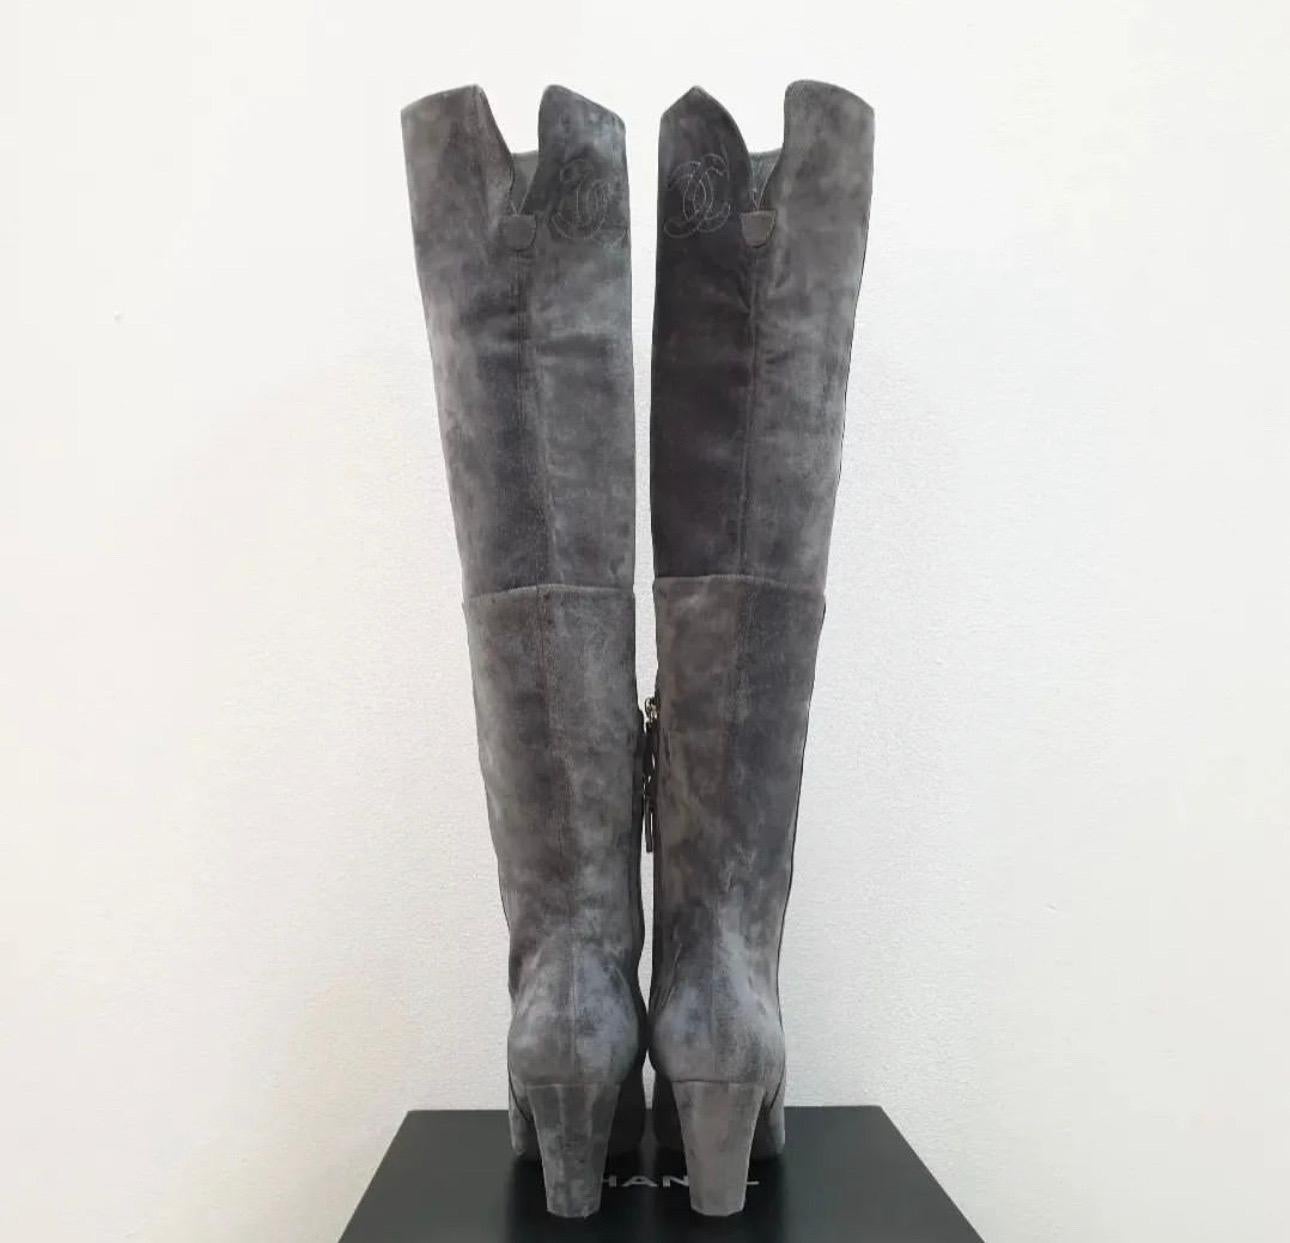 CHANEL gray suede over the knee boots from the 13B collection,  
Grey suede with cap toe detail; covered hexagonal heels. 
Pull on style with lower inner half zip; large interlocking CC embroidery at the inner toplines.
Sz.38
No original packaging.
